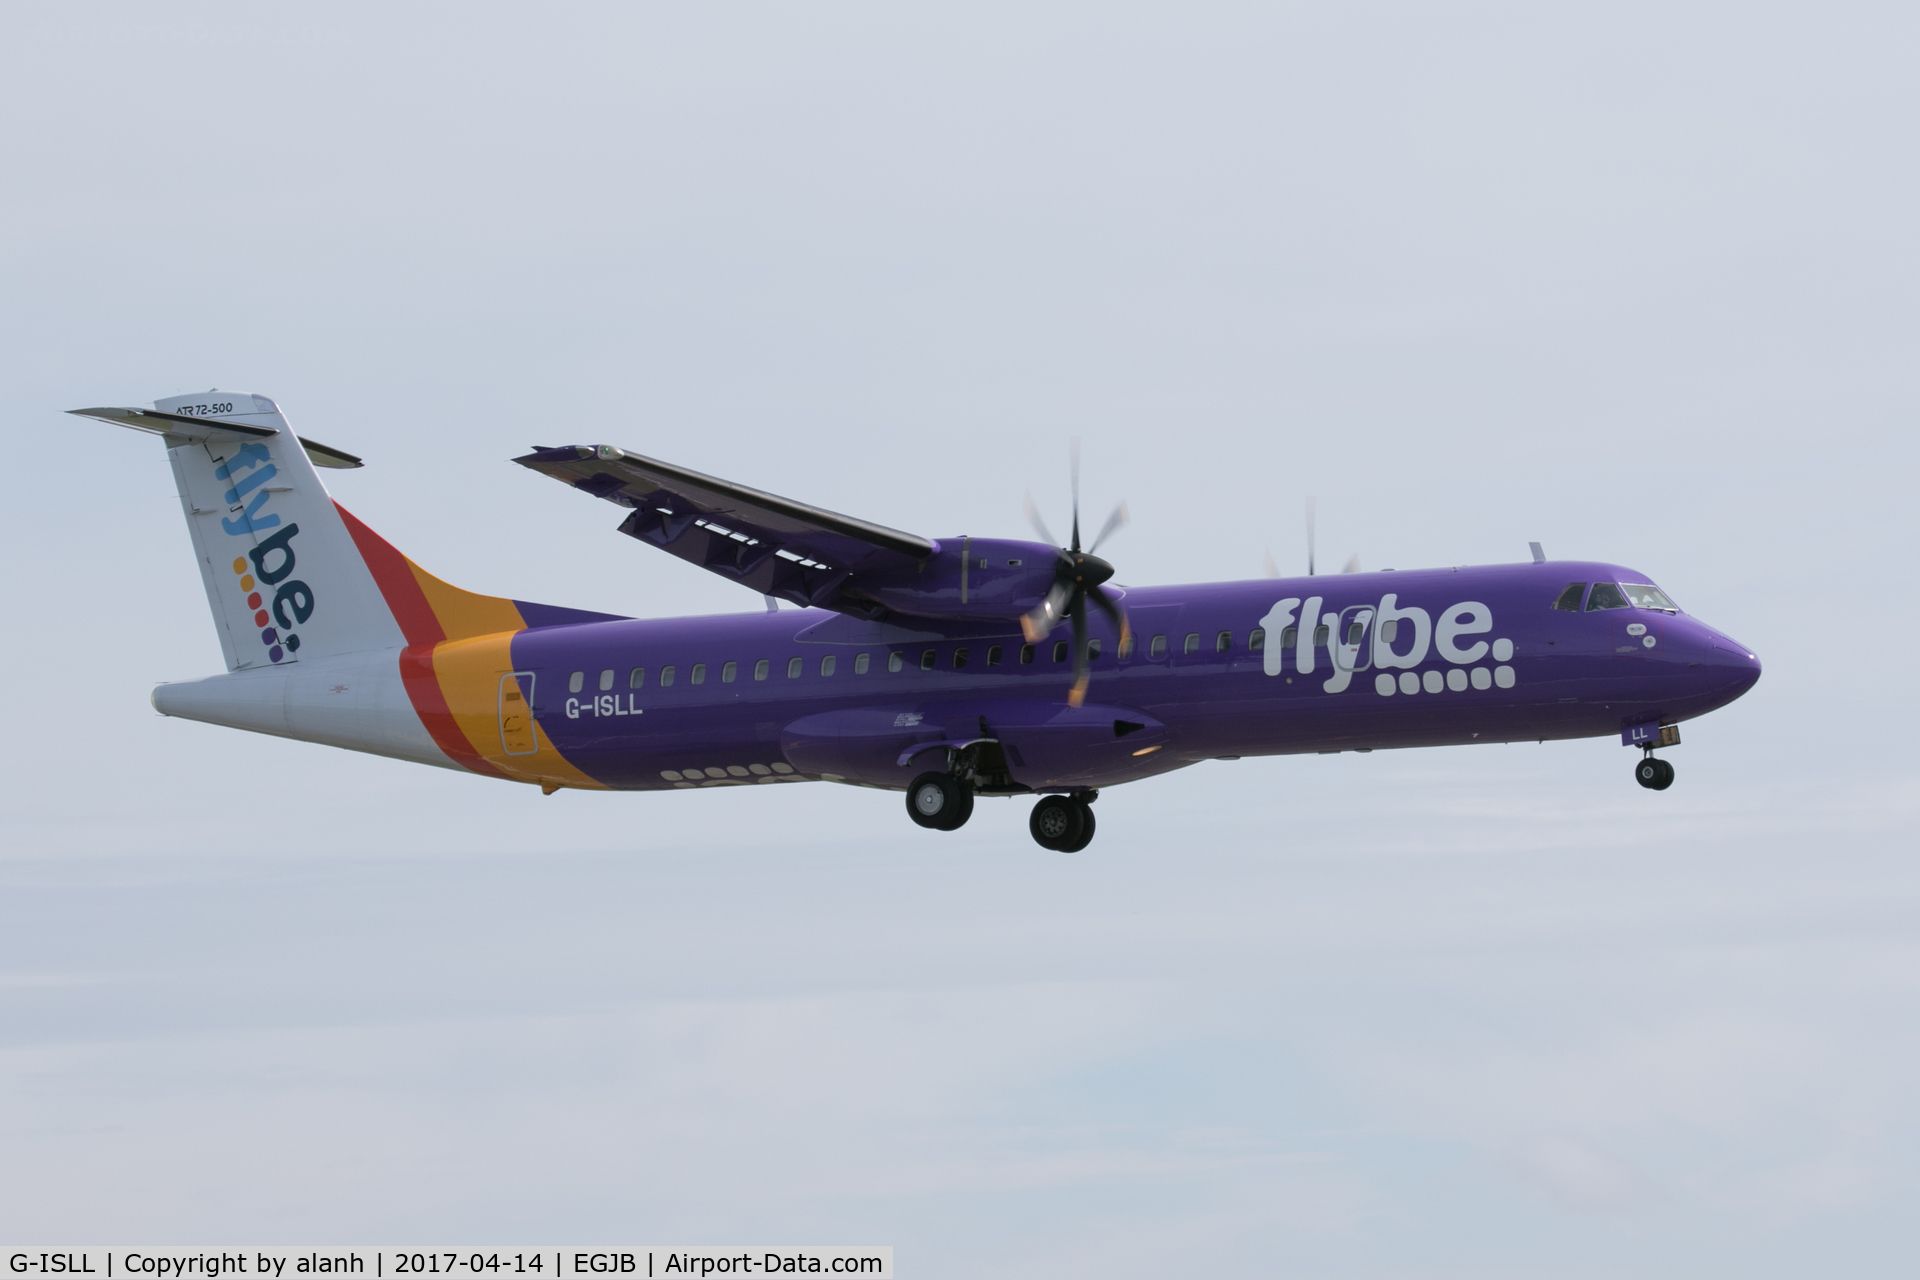 G-ISLL, 2002 ATR 72-212A C/N 696, Blue Islands owned but in the colours of their franchise partner Flybe, landing at Guernsey